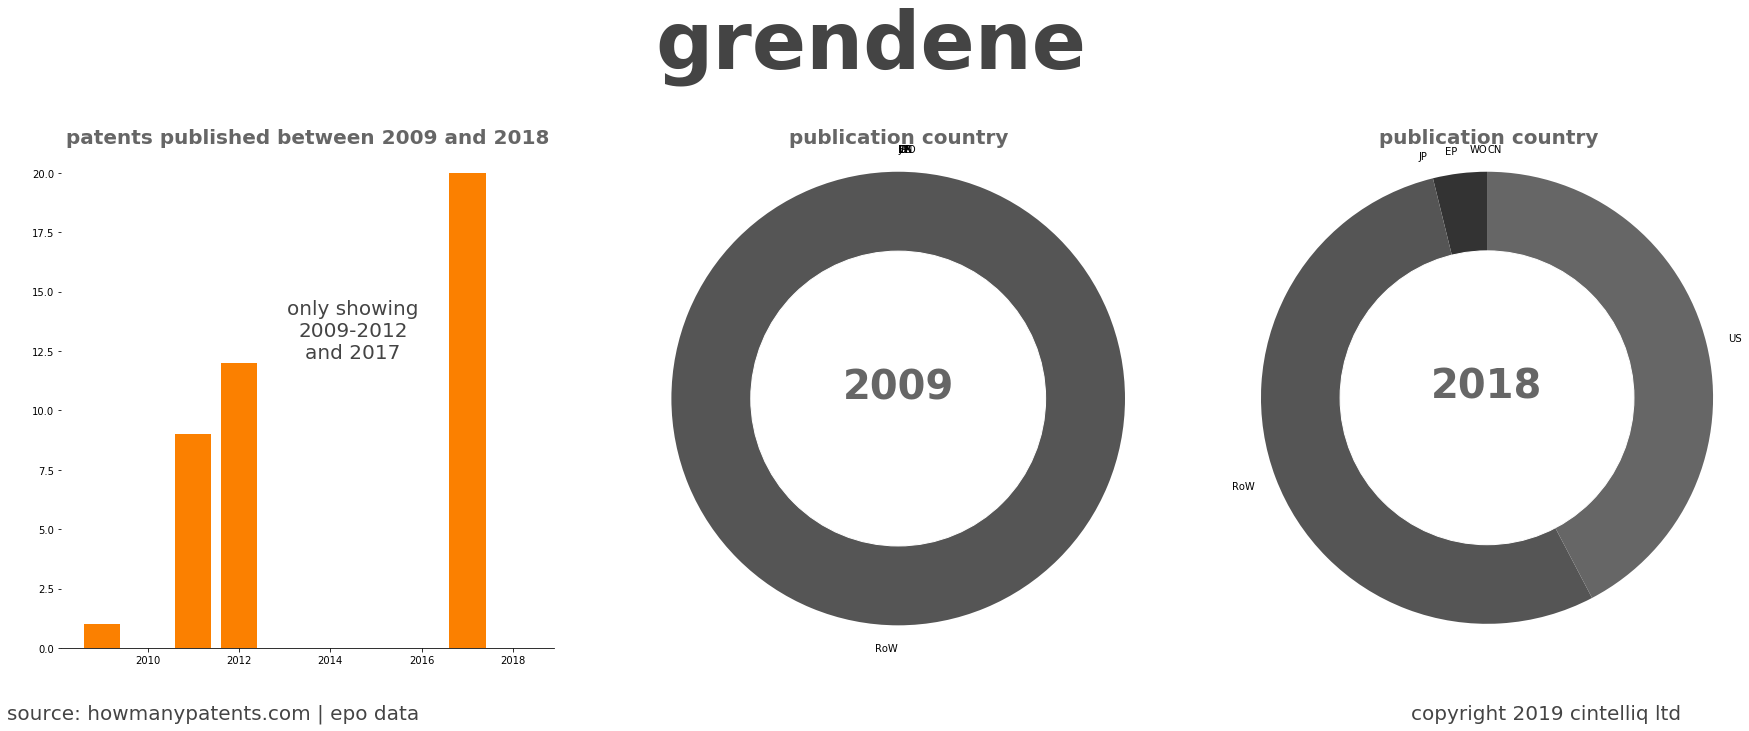 summary of patents for Grendene